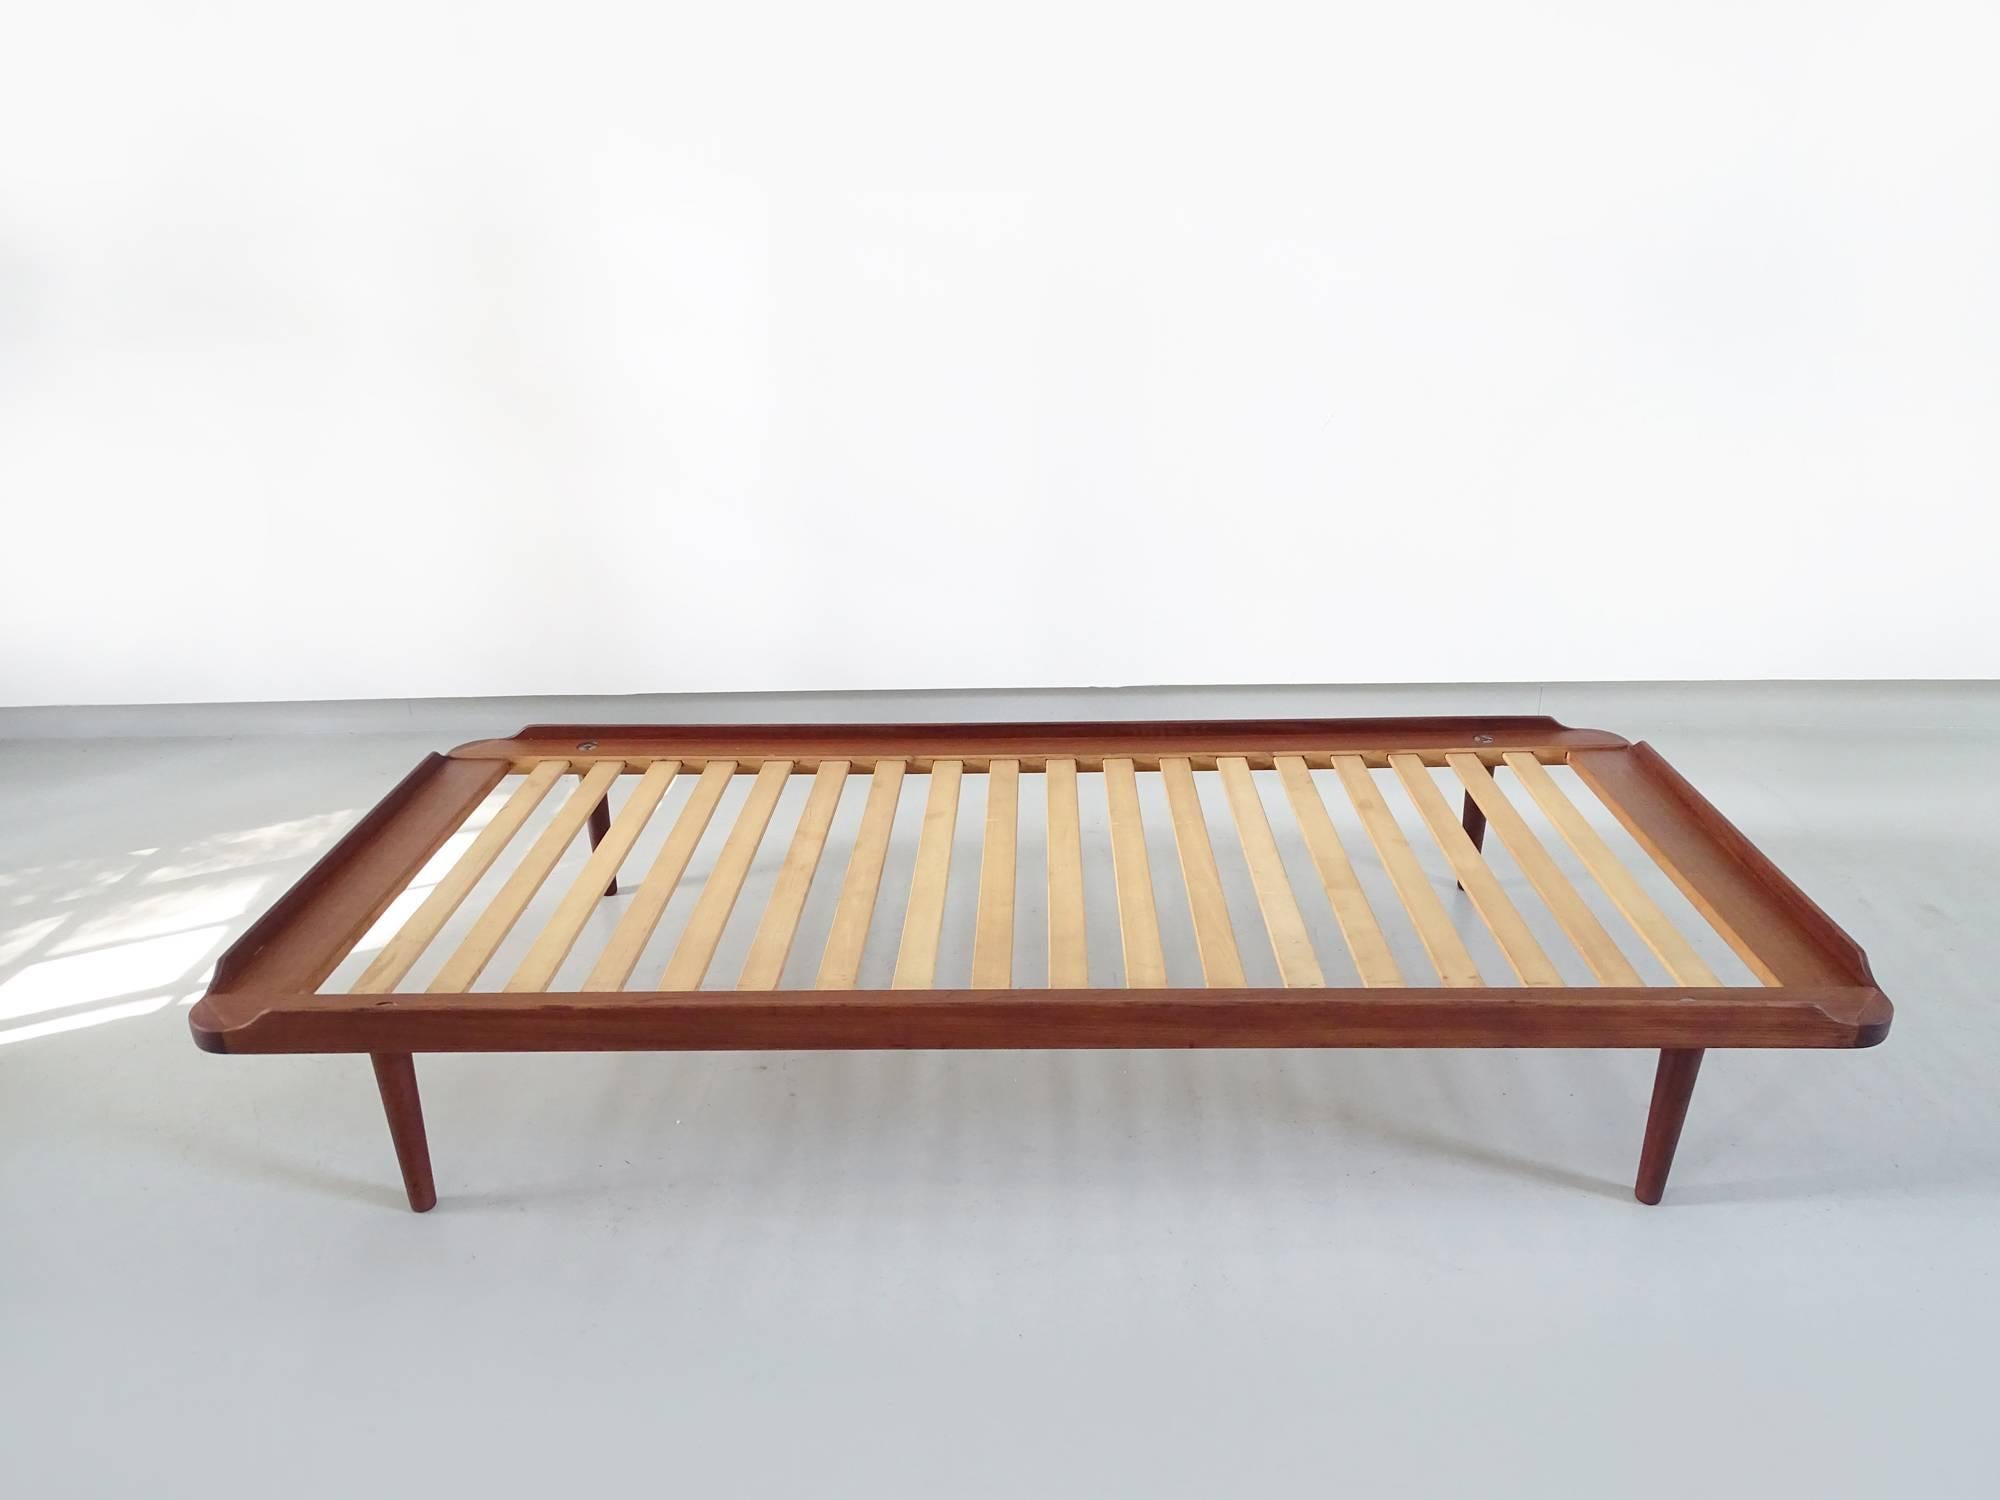 Grete Jalk Daybed in Teak and Cognac Leather for P. Jeppesen, Denmark, 1960 For Sale 5